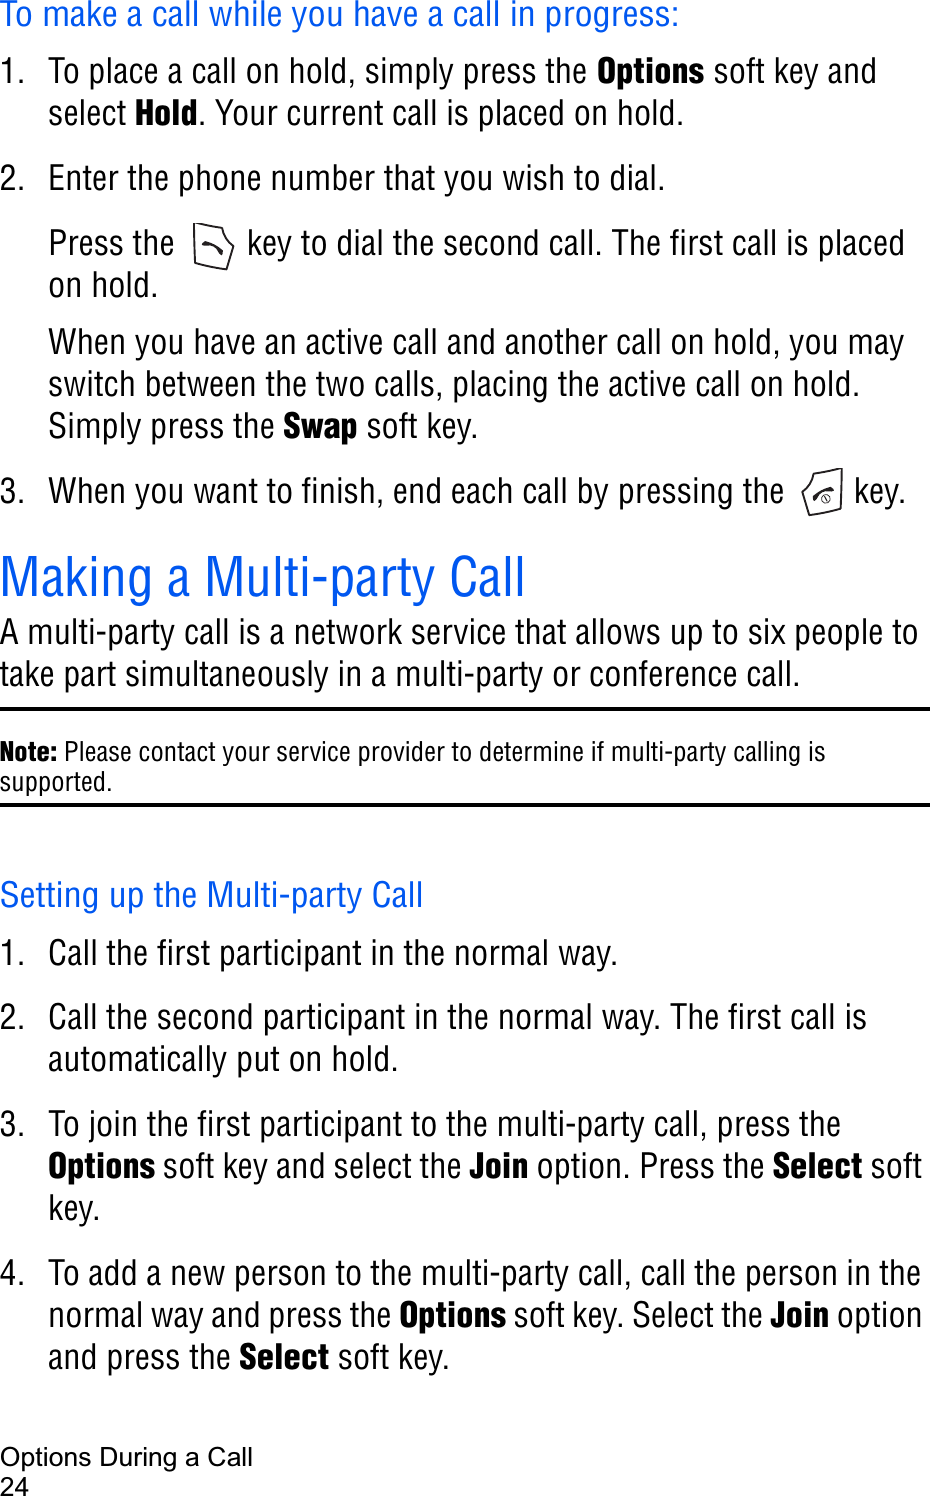 Options During a Call24To make a call while you have a call in progress:1. To place a call on hold, simply press the Options soft key and select Hold. Your current call is placed on hold.2. Enter the phone number that you wish to dial.Press the   key to dial the second call. The first call is placed on hold.When you have an active call and another call on hold, you may switch between the two calls, placing the active call on hold. Simply press the Swap soft key.3. When you want to finish, end each call by pressing the   key.Making a Multi-party CallA multi-party call is a network service that allows up to six people to take part simultaneously in a multi-party or conference call.Note: Please contact your service provider to determine if multi-party calling is supported.Setting up the Multi-party Call1. Call the first participant in the normal way.2. Call the second participant in the normal way. The first call is automatically put on hold.3. To join the first participant to the multi-party call, press the Options soft key and select the Join option. Press the Select soft key.4. To add a new person to the multi-party call, call the person in the normal way and press the Options soft key. Select the Join option and press the Select soft key.